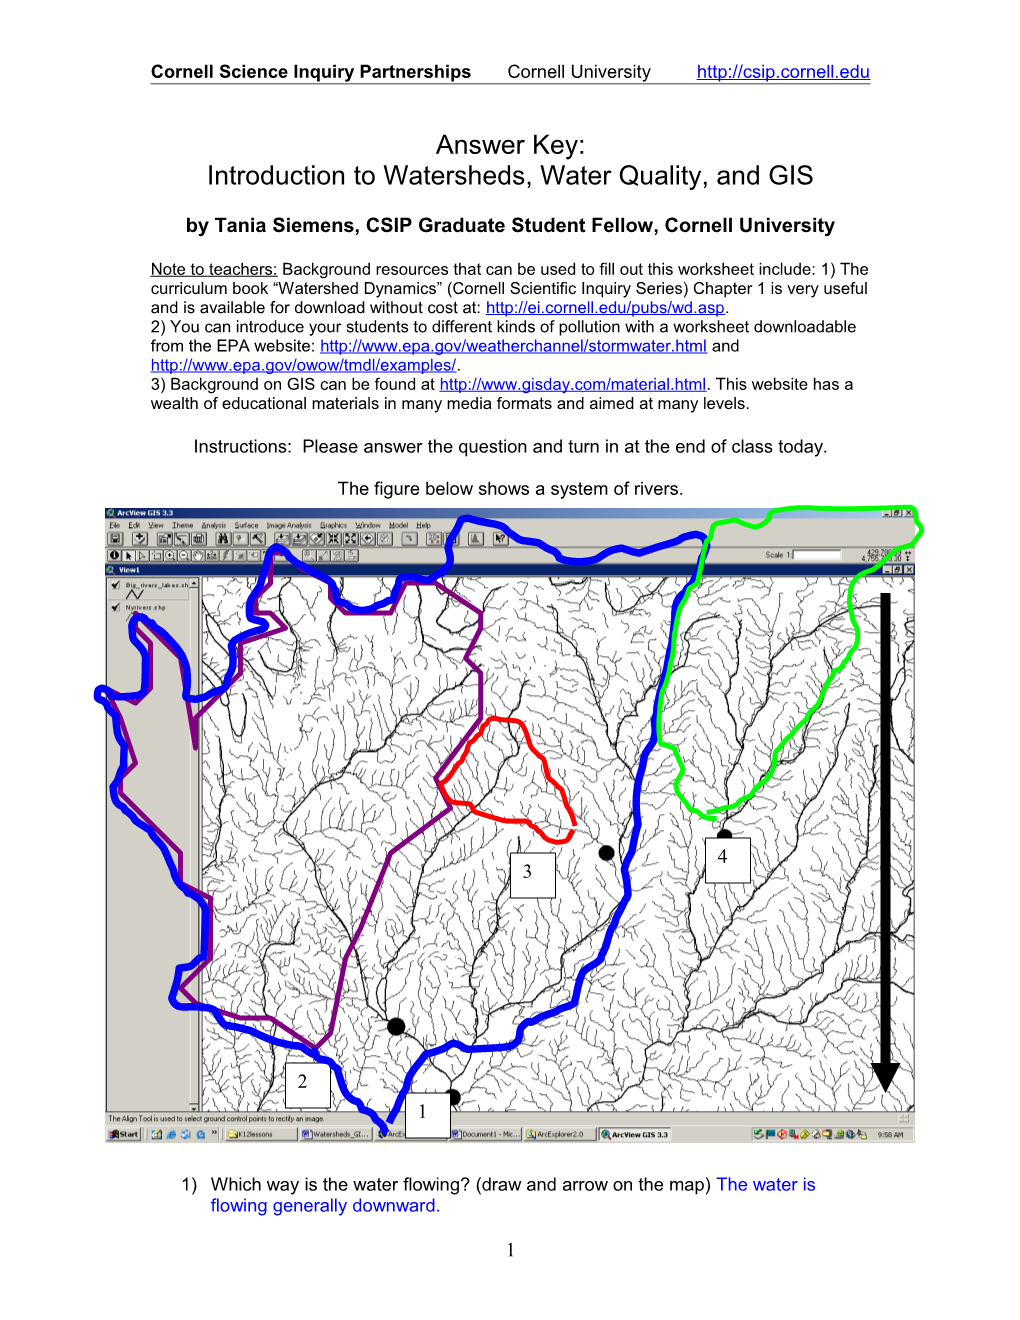 Introduction to Watersheds, Water Quality, and GIS